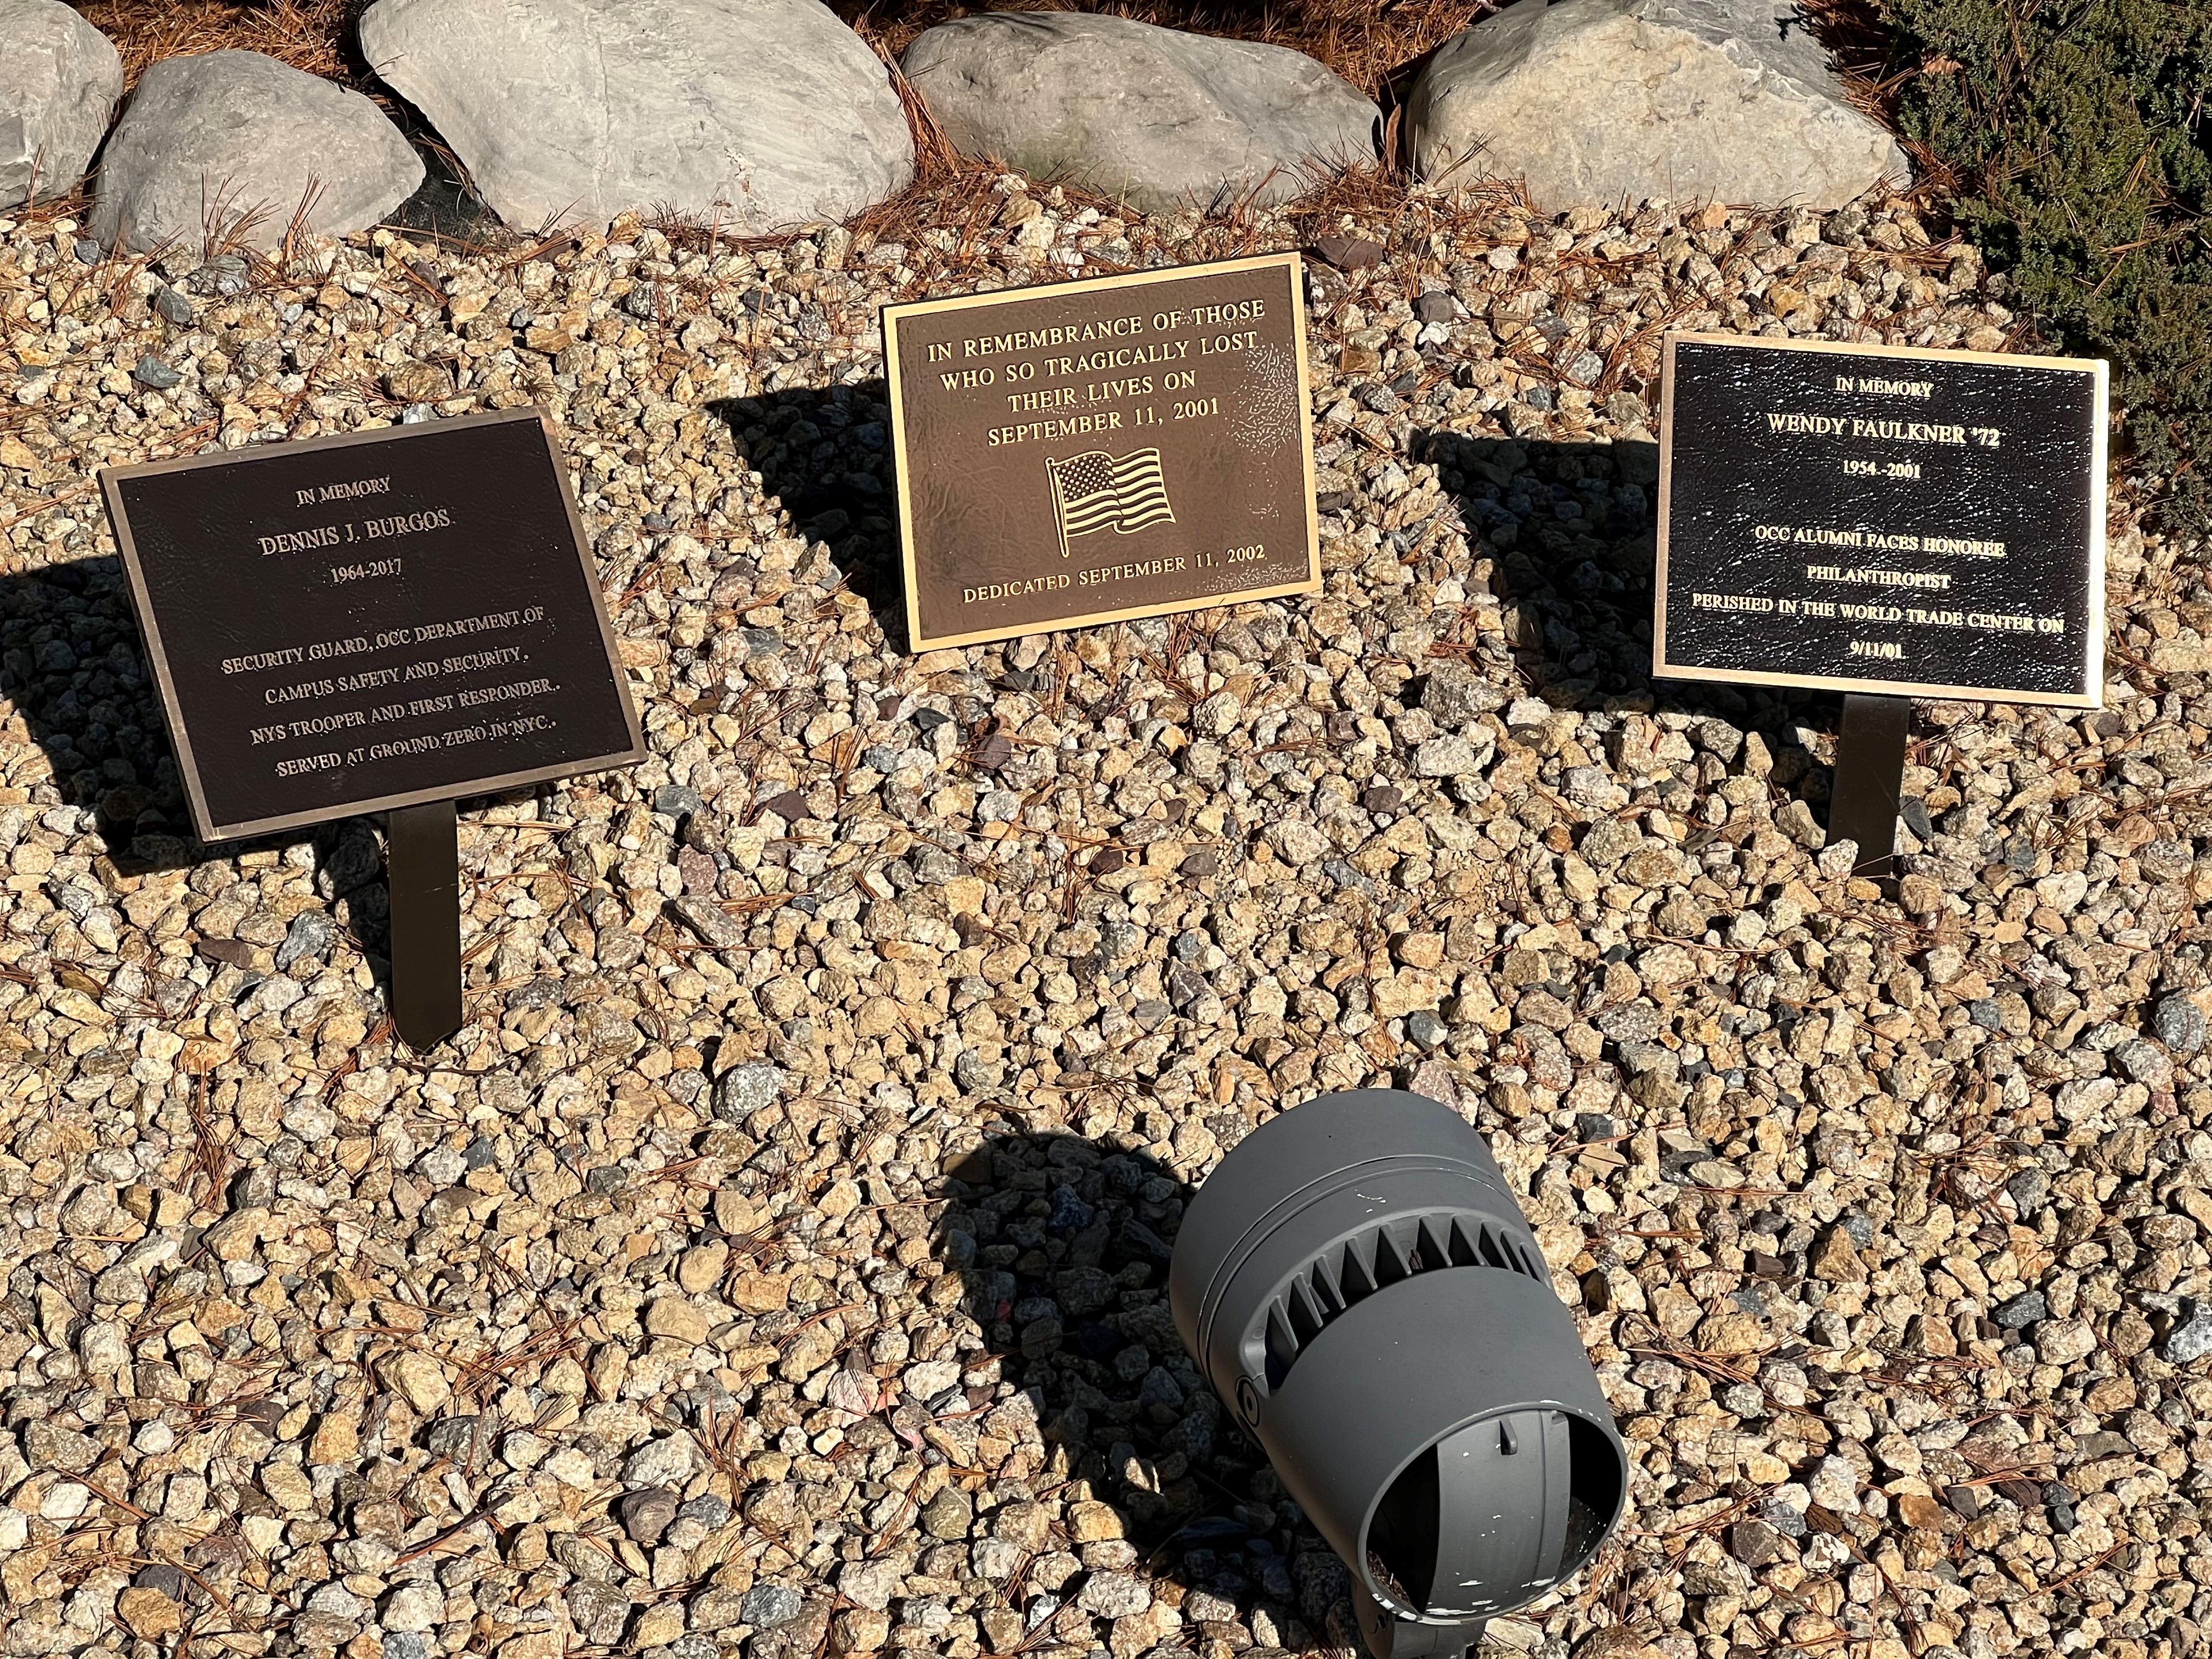 Plaques dedicated to Dennis Burgos and Wendy Faulkner